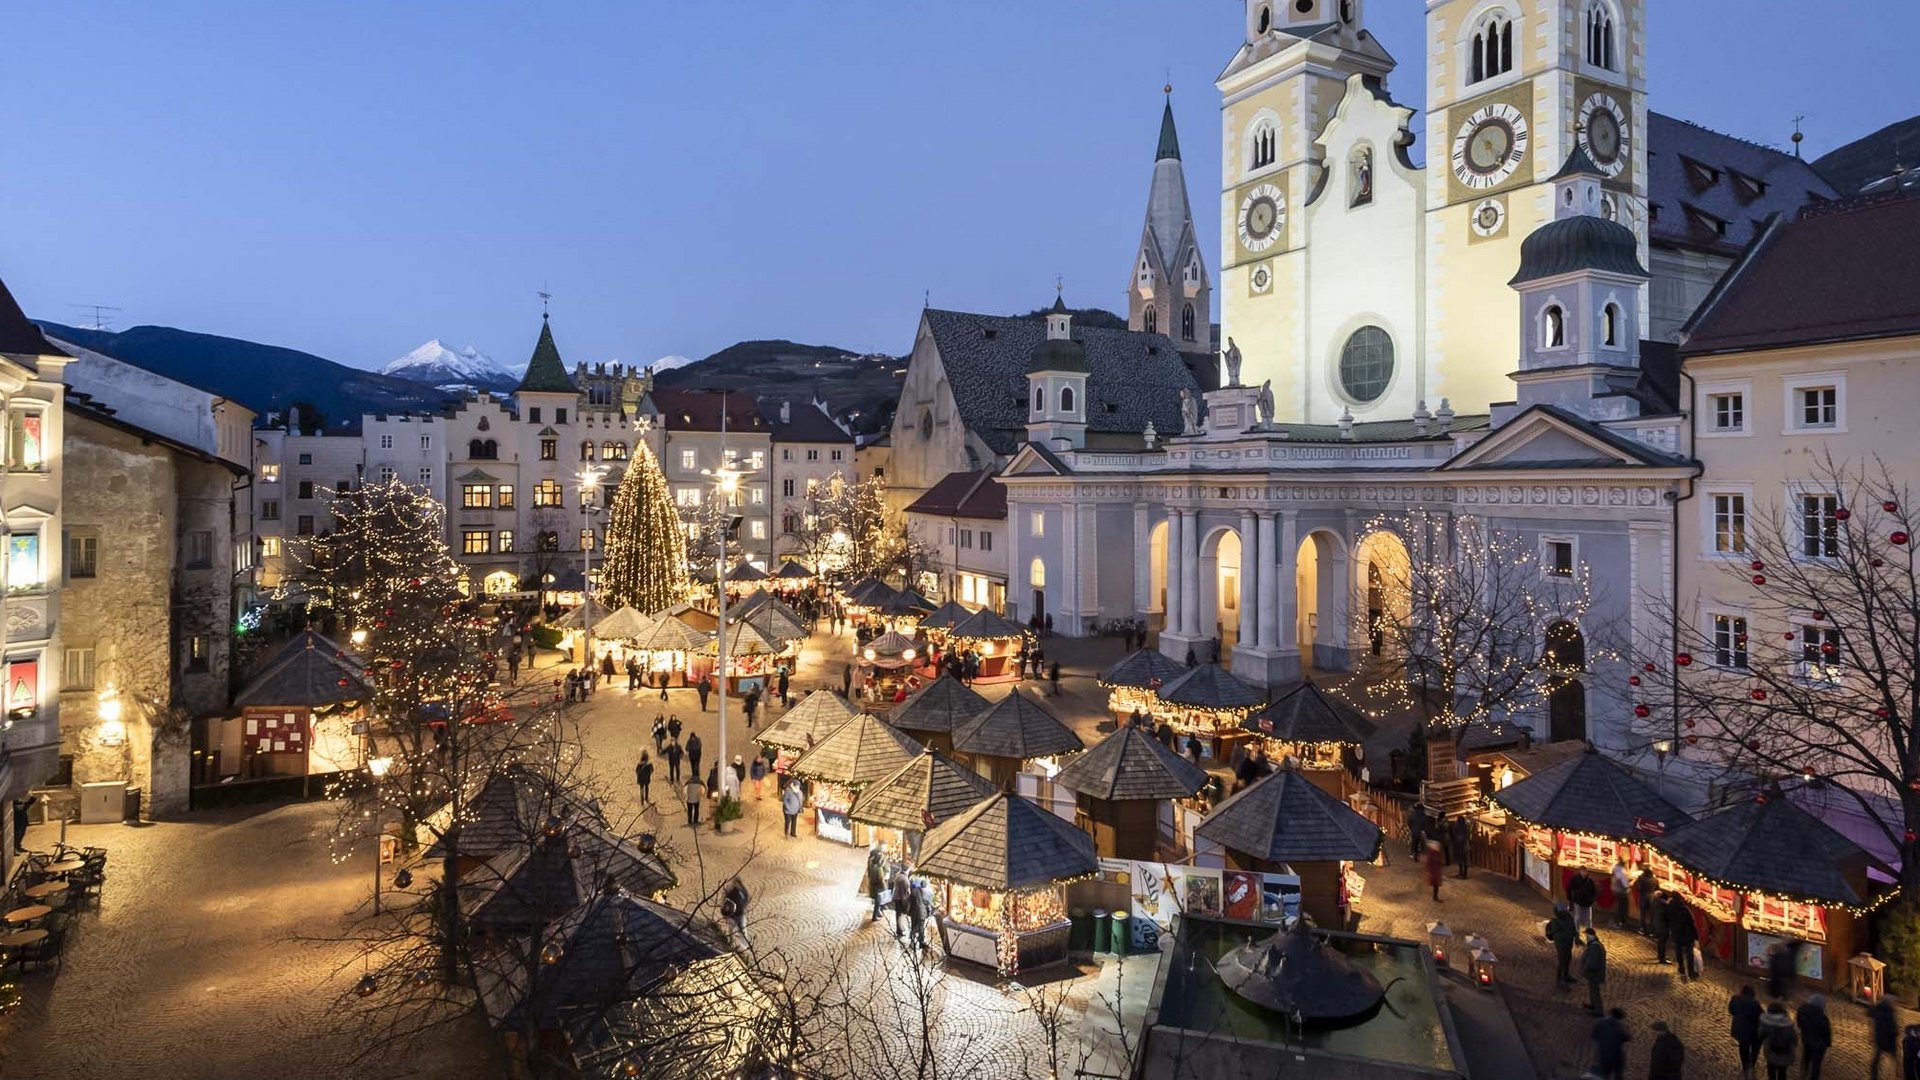 Your ski holiday in Brixen/South Tyrol